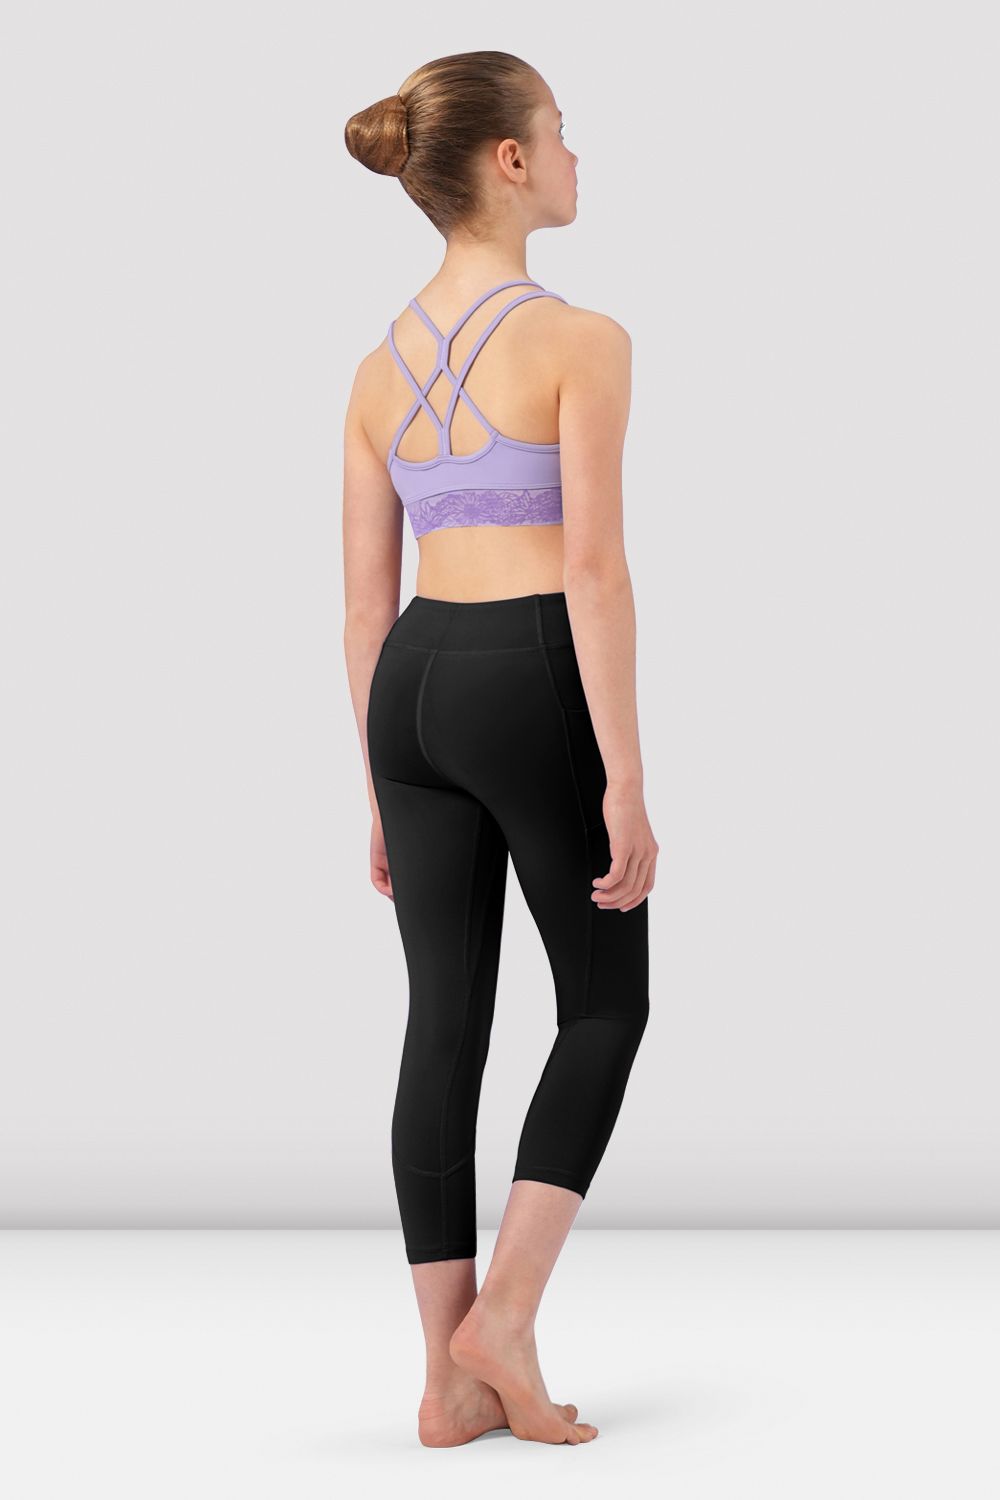 Women's Leggings: New & Used On Sale Up To 90% Off